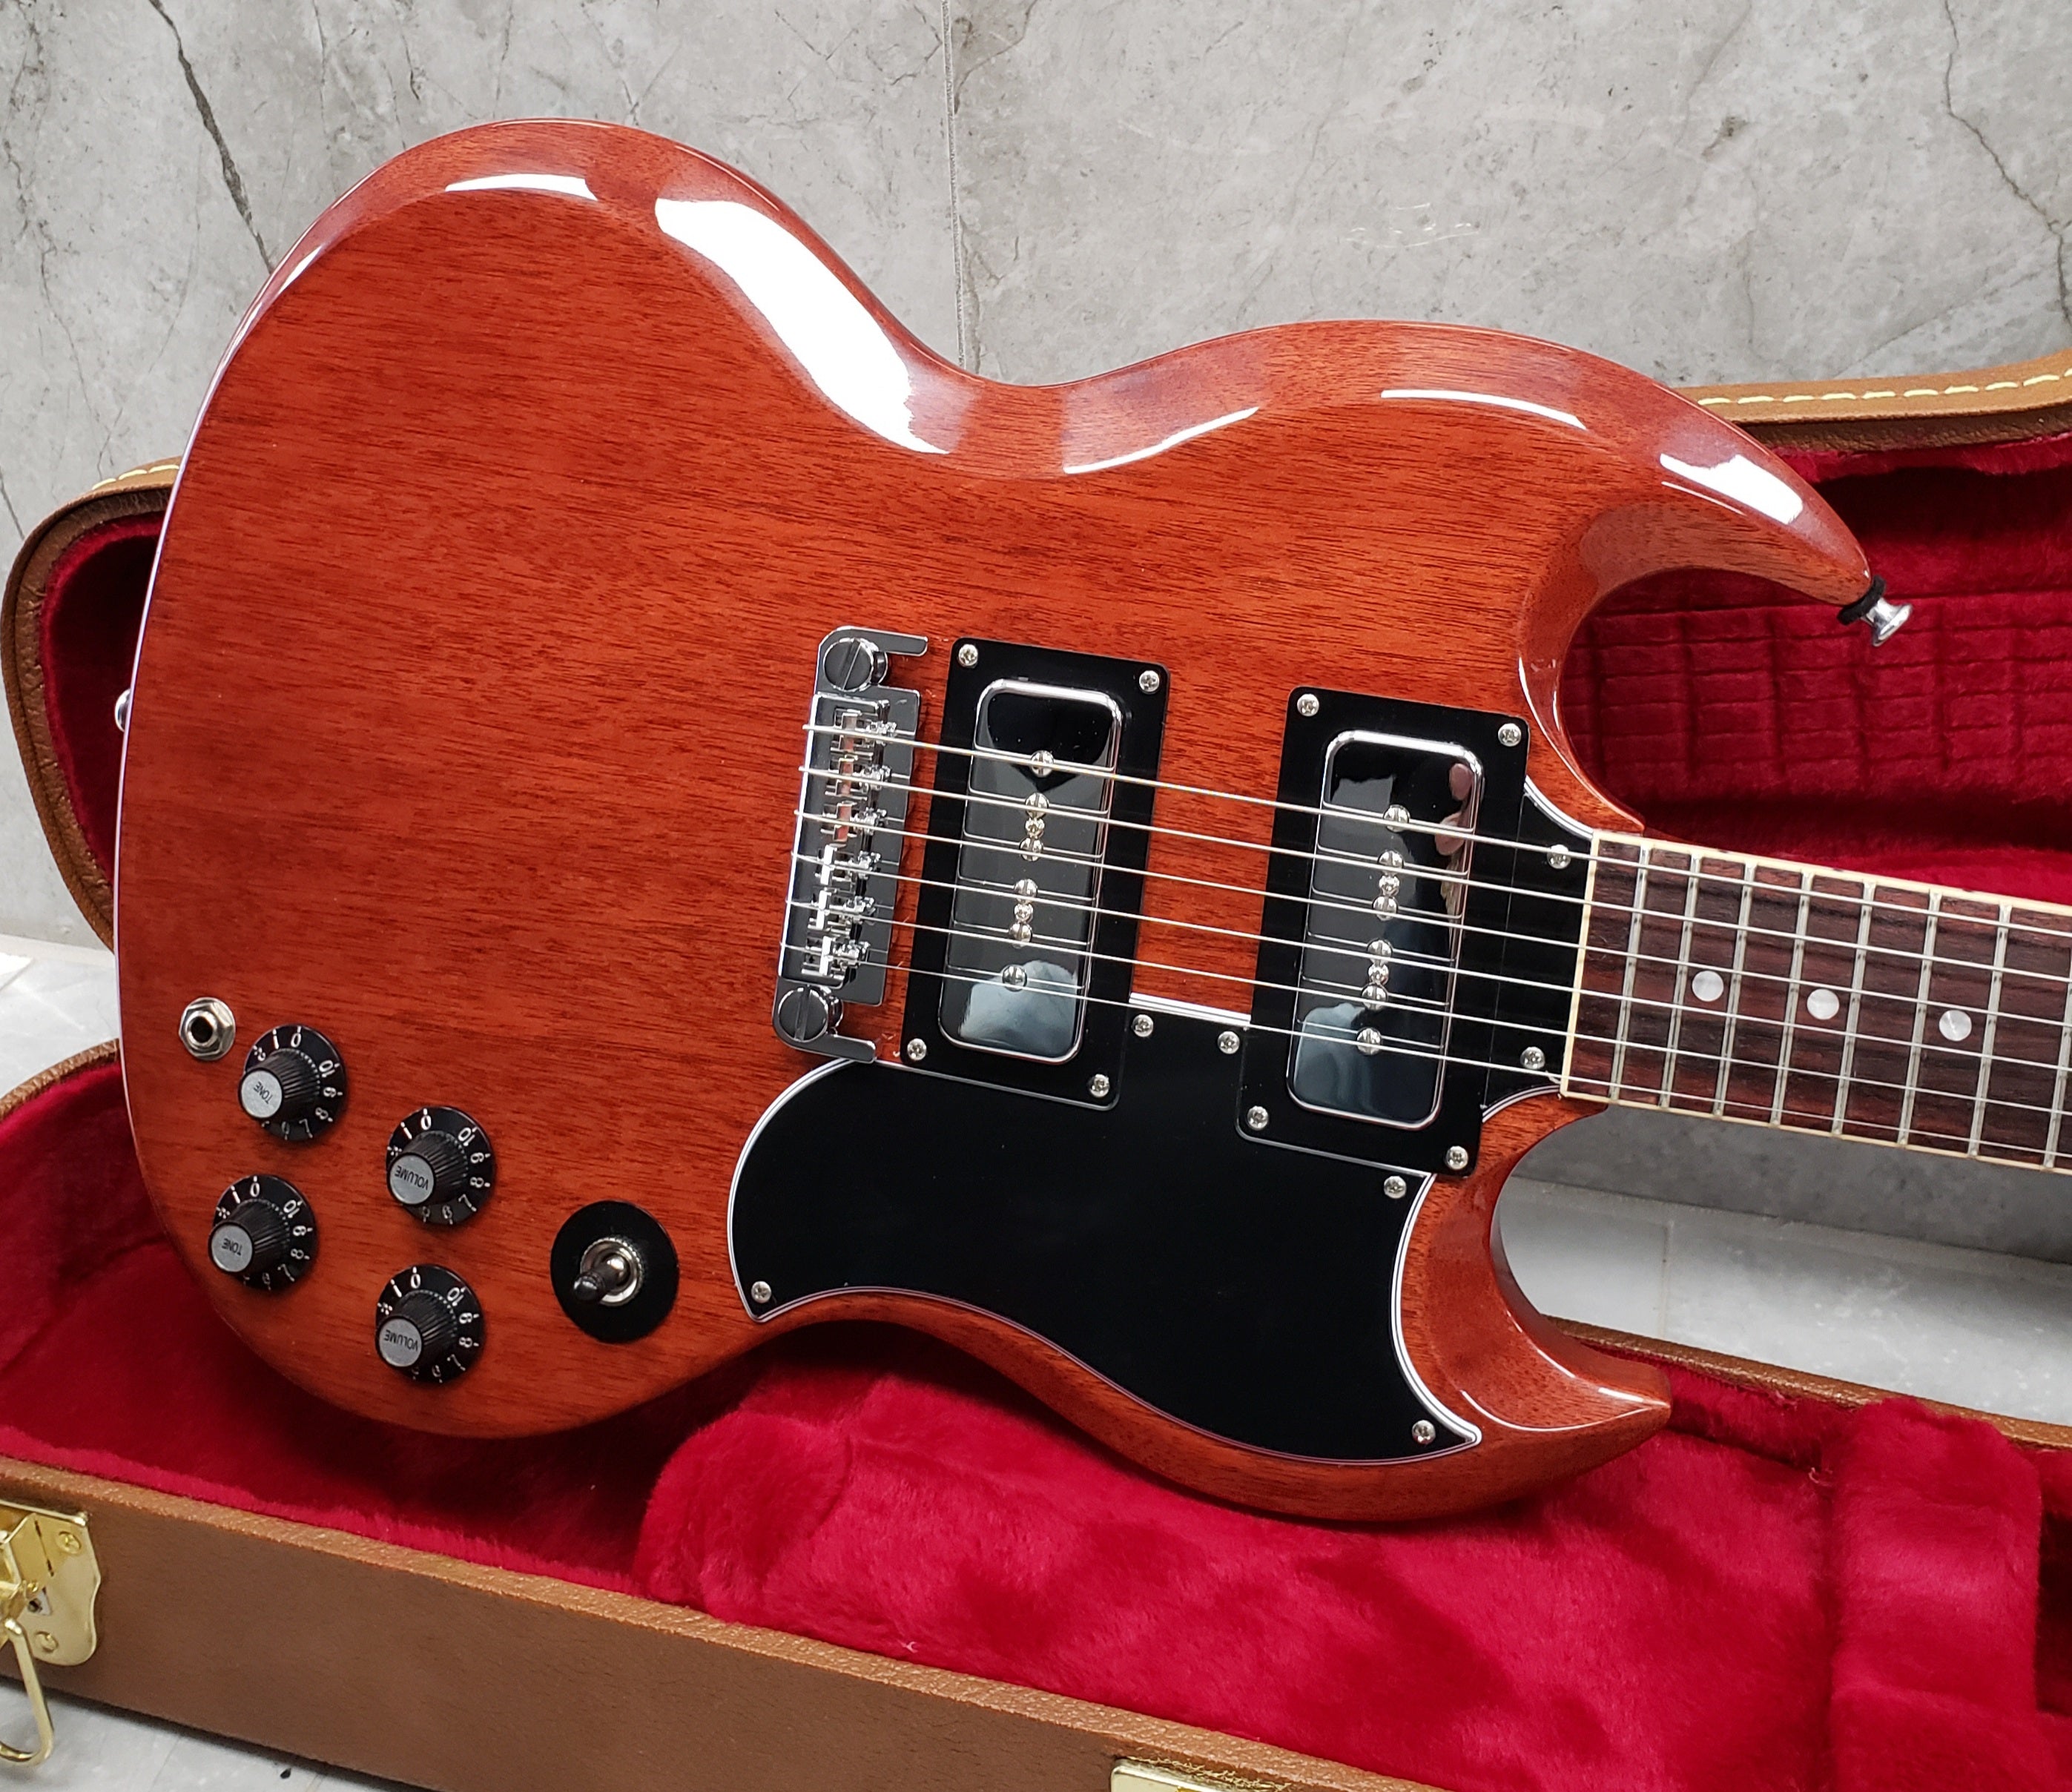 Gibson Tony Iommi Monkey SG Special in Vintage Red SGTI21VCCH SERIAL NUMBER  218910107 - 6.4 LBS